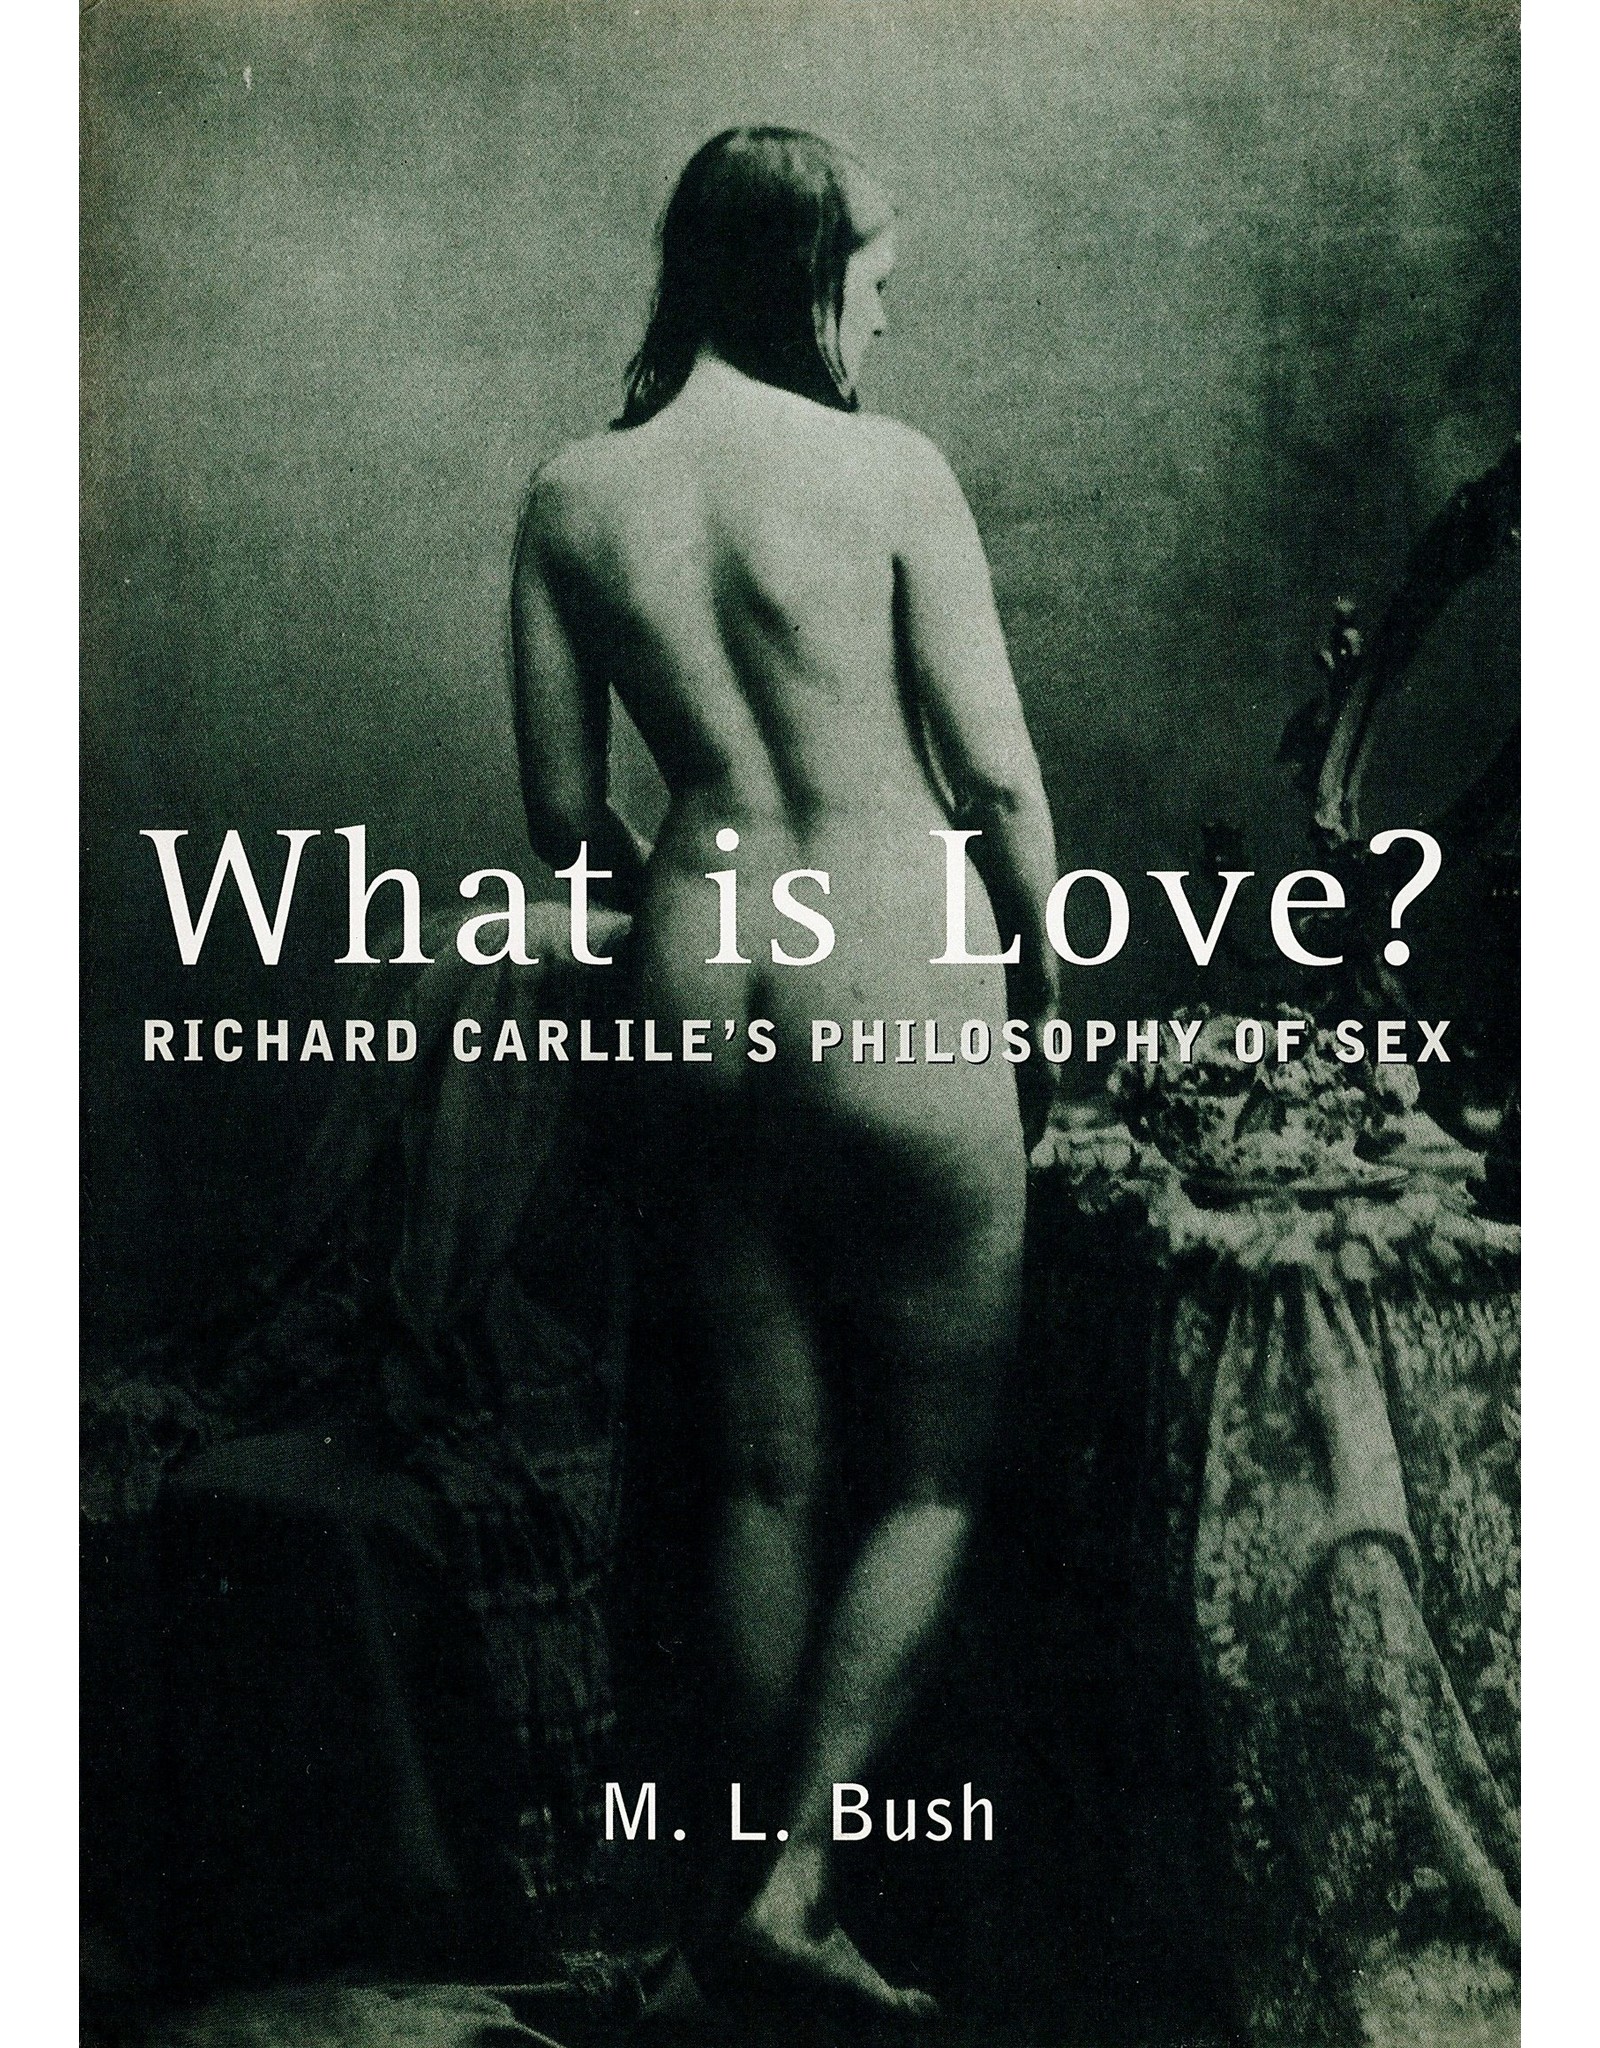 Literature What Is Love?: Richard Carlile's Philosophy of Sex